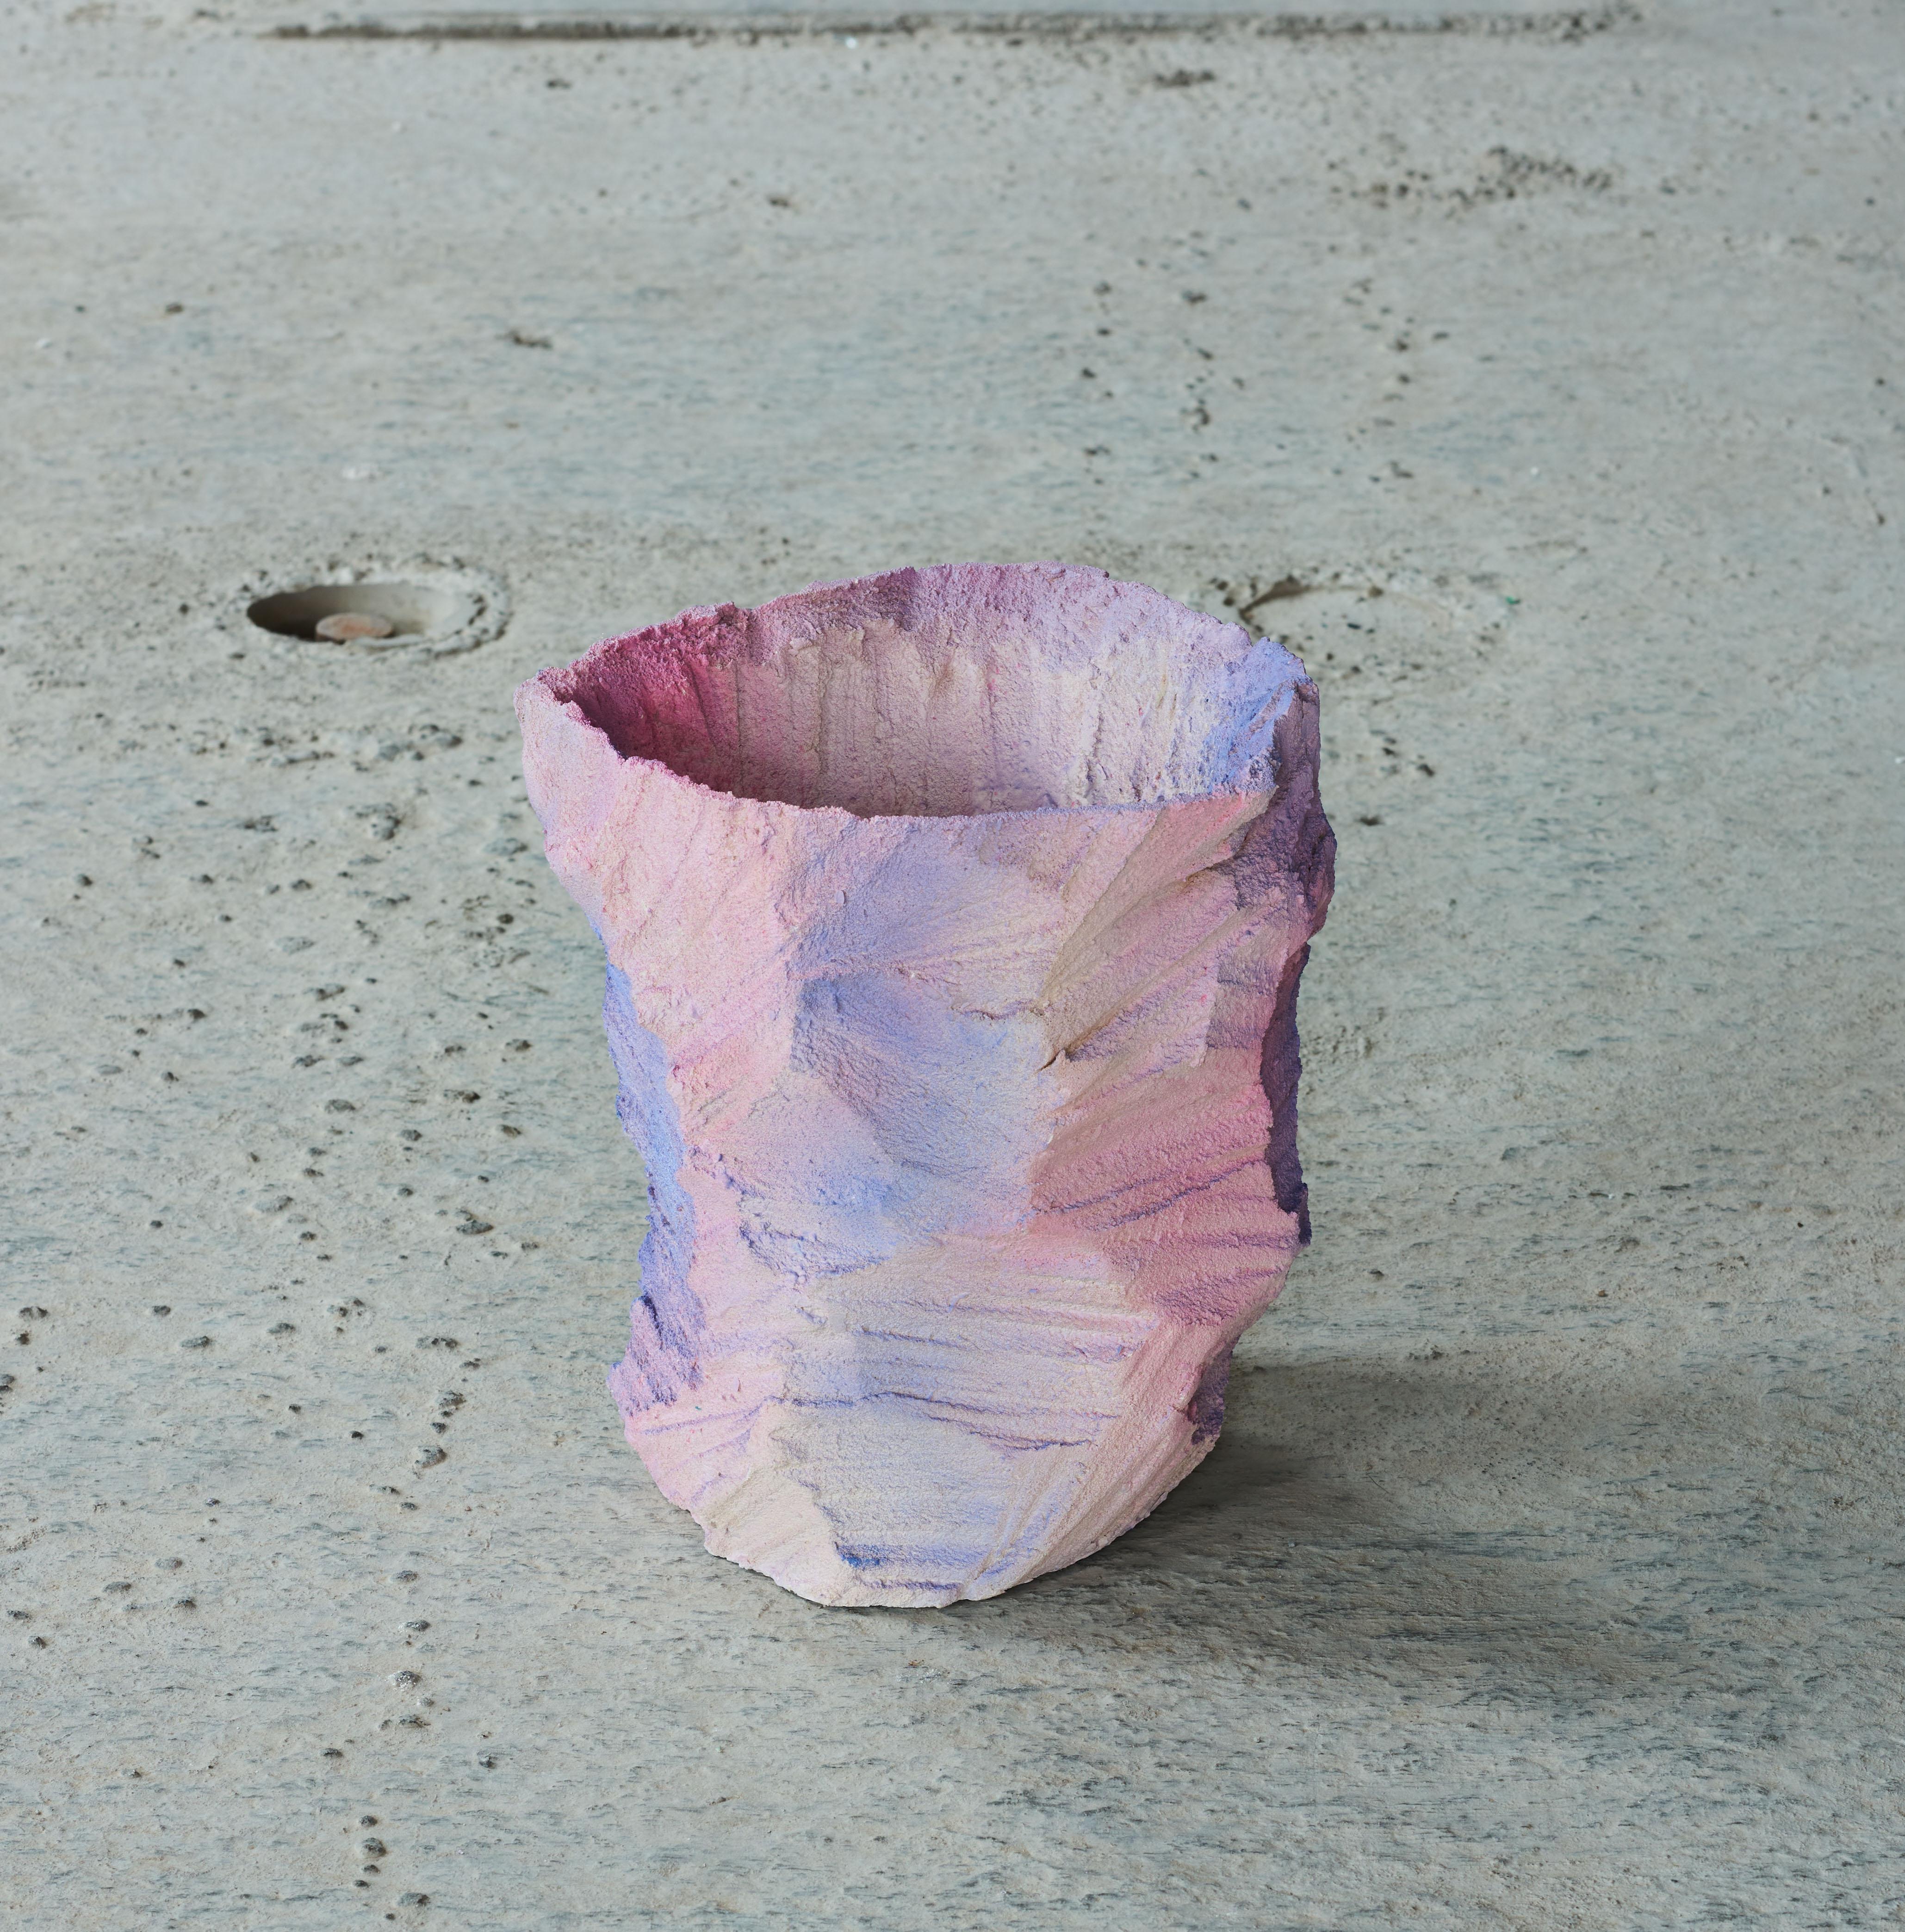 Crystal Rock vase by Andredottir & Bobek
Dimensions: D 40 x H 30 cm
Materials: Reused Foam/mattress and Jesmonite Hardner in Color Purple/Pink fade
 
Artificial Nature is a collaboration between the artist and design duo Josephine Andredottir